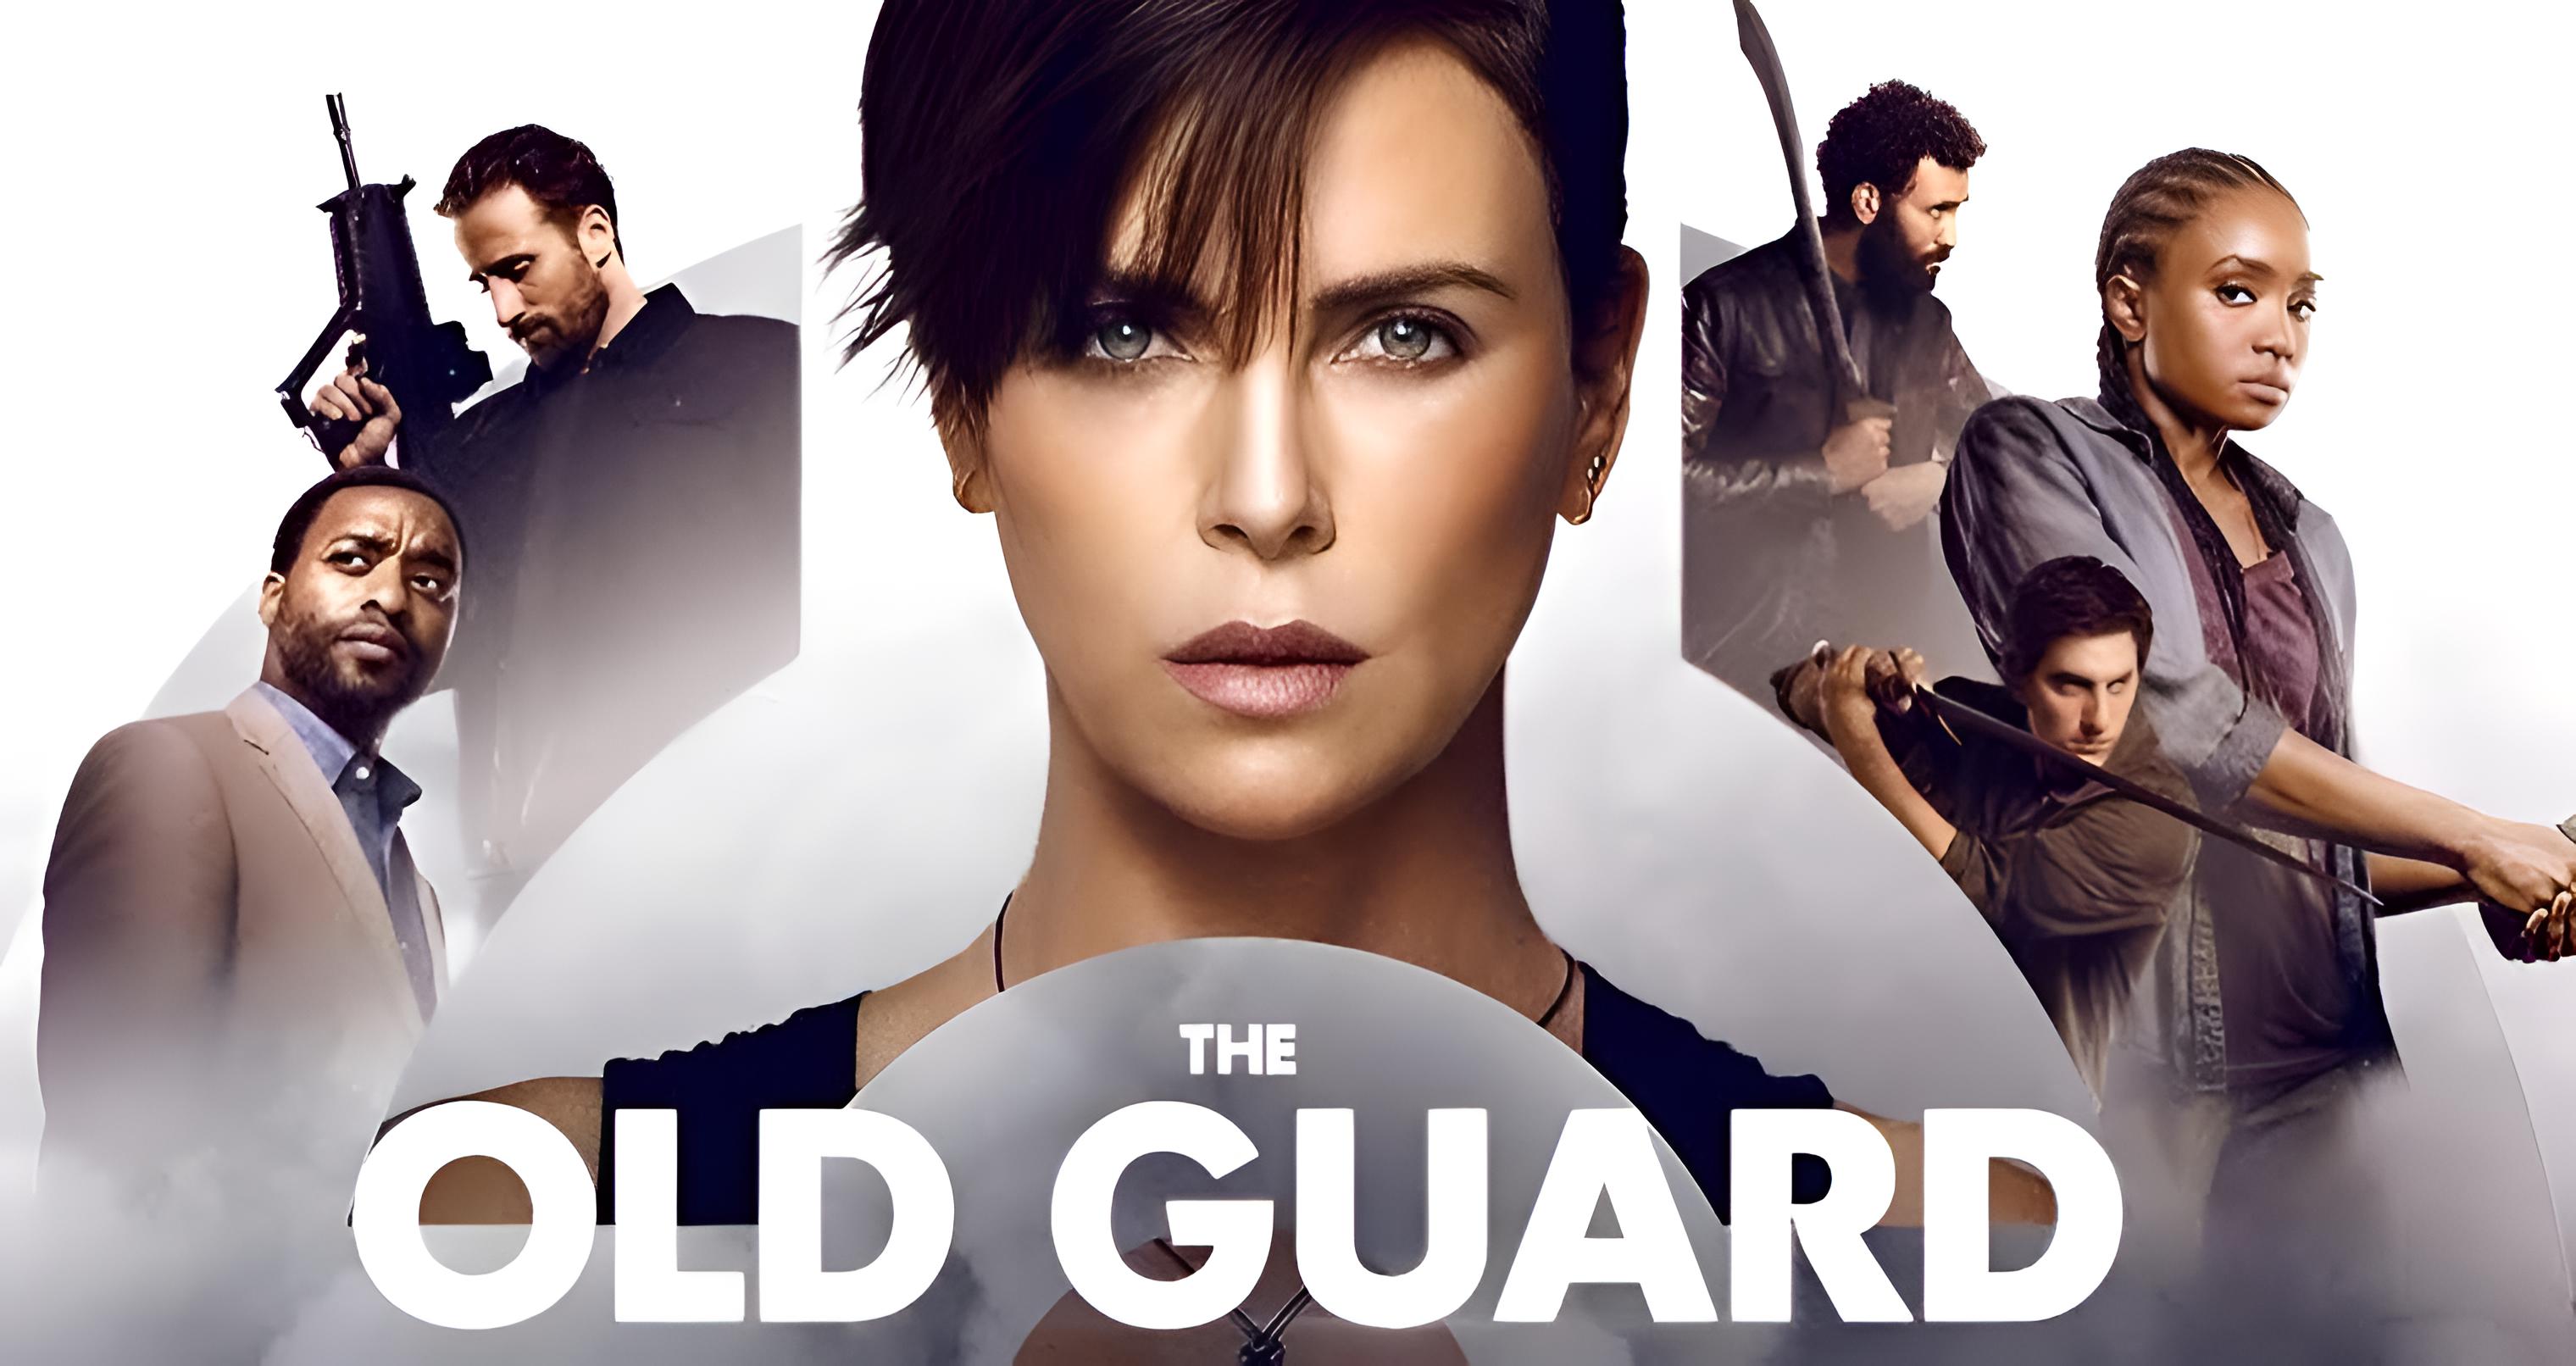 The Old Guard Film Review - Immortal Special Forces